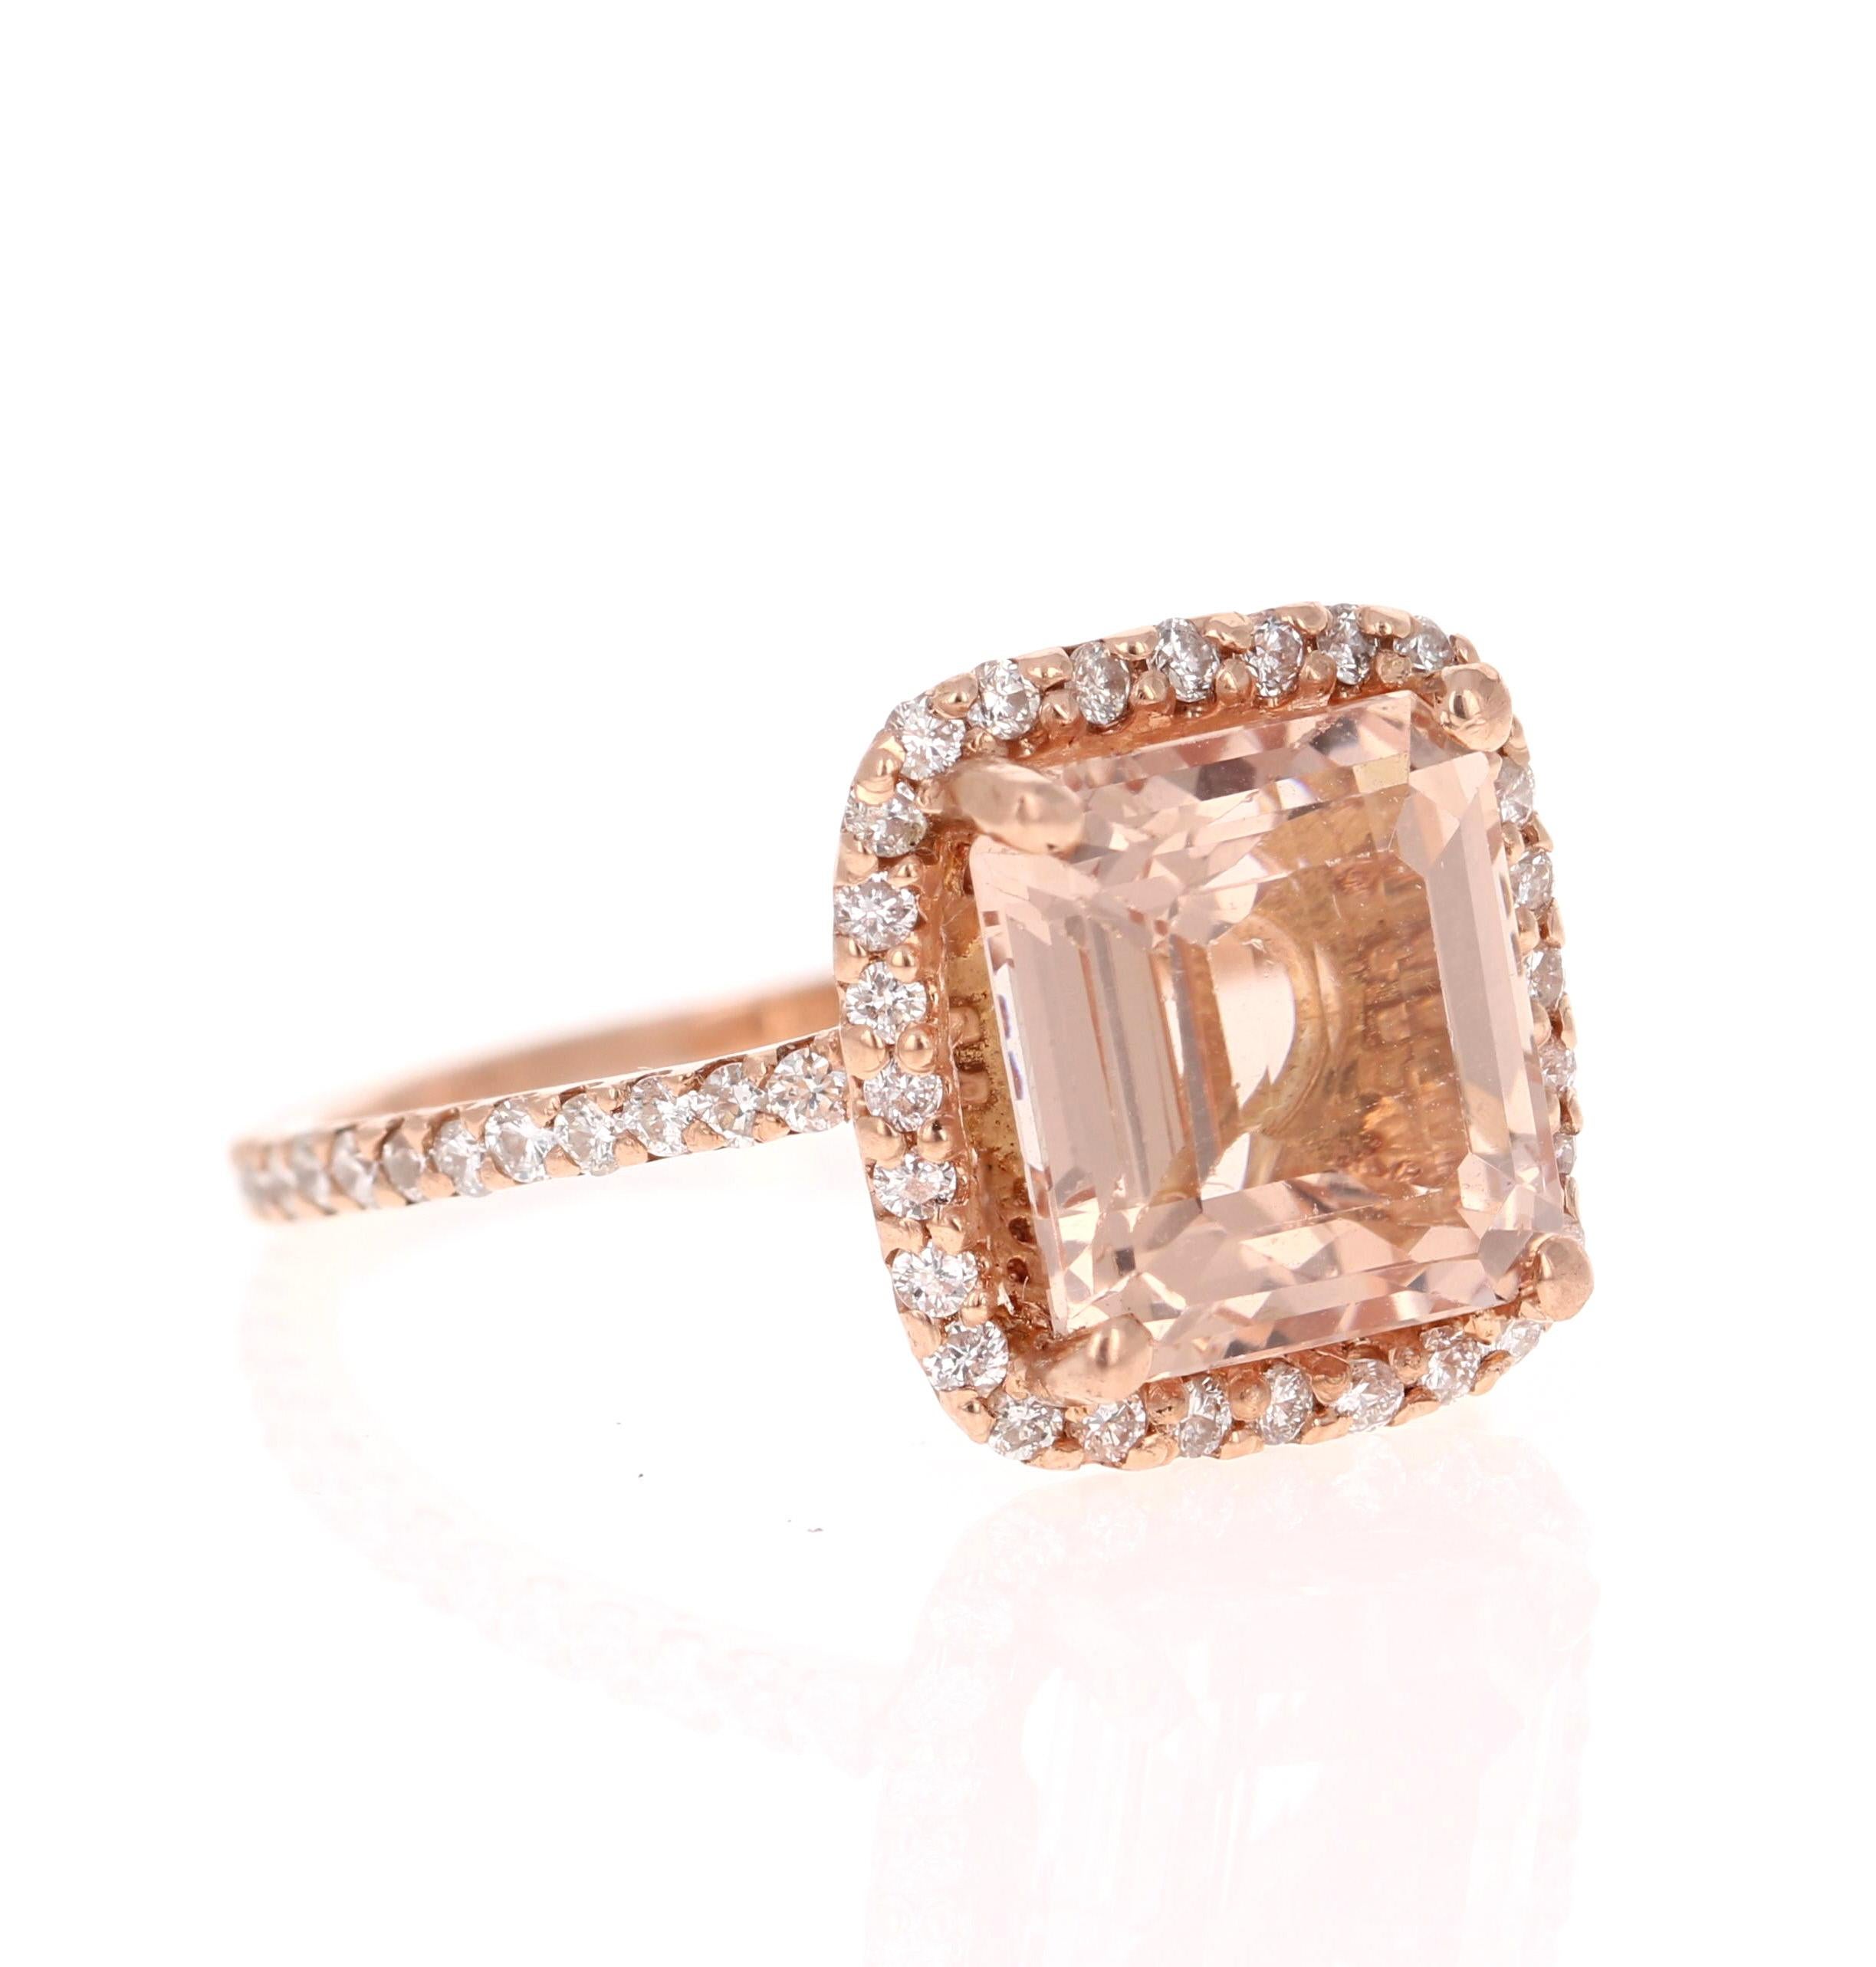 This ring has a 3.84 Carat Emerald Cut Morganite and is surrounded by 80 Round Cut Diamonds that weigh 0.67 Carats. The total carat weight of the ring is 4.51 Carats. (Clarity: VS, Color: H)

The natural Morganite measures at 9 mm x 11 mm. The color